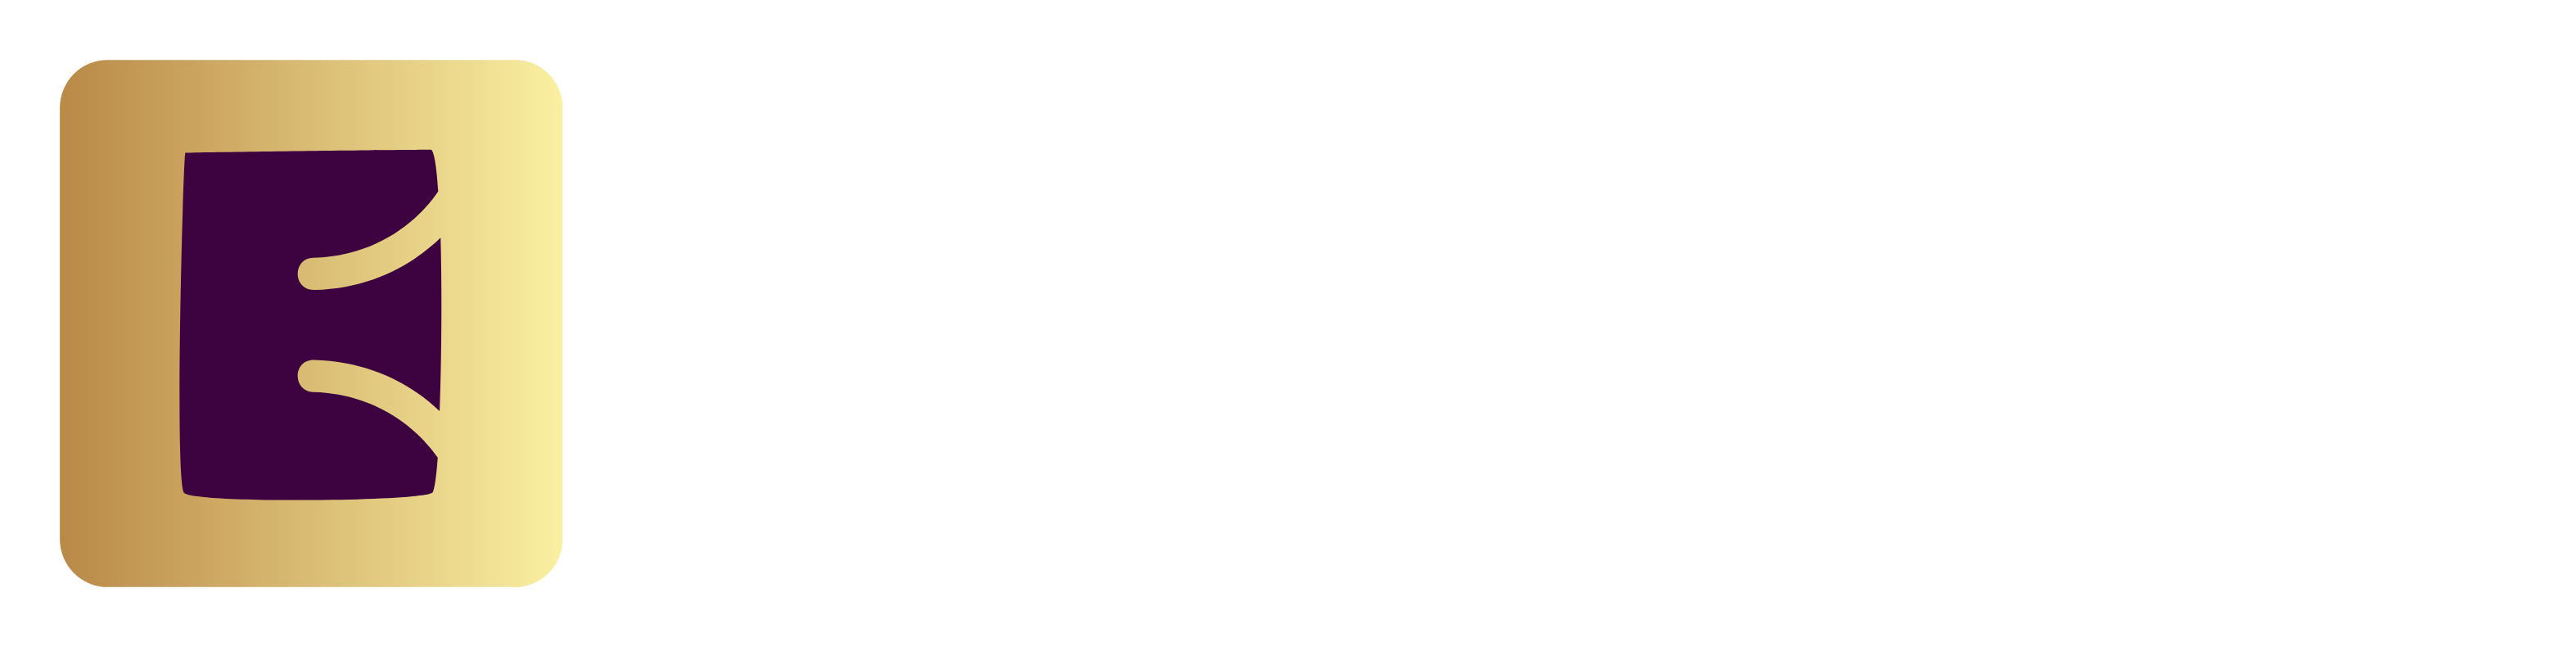 Empower Realty